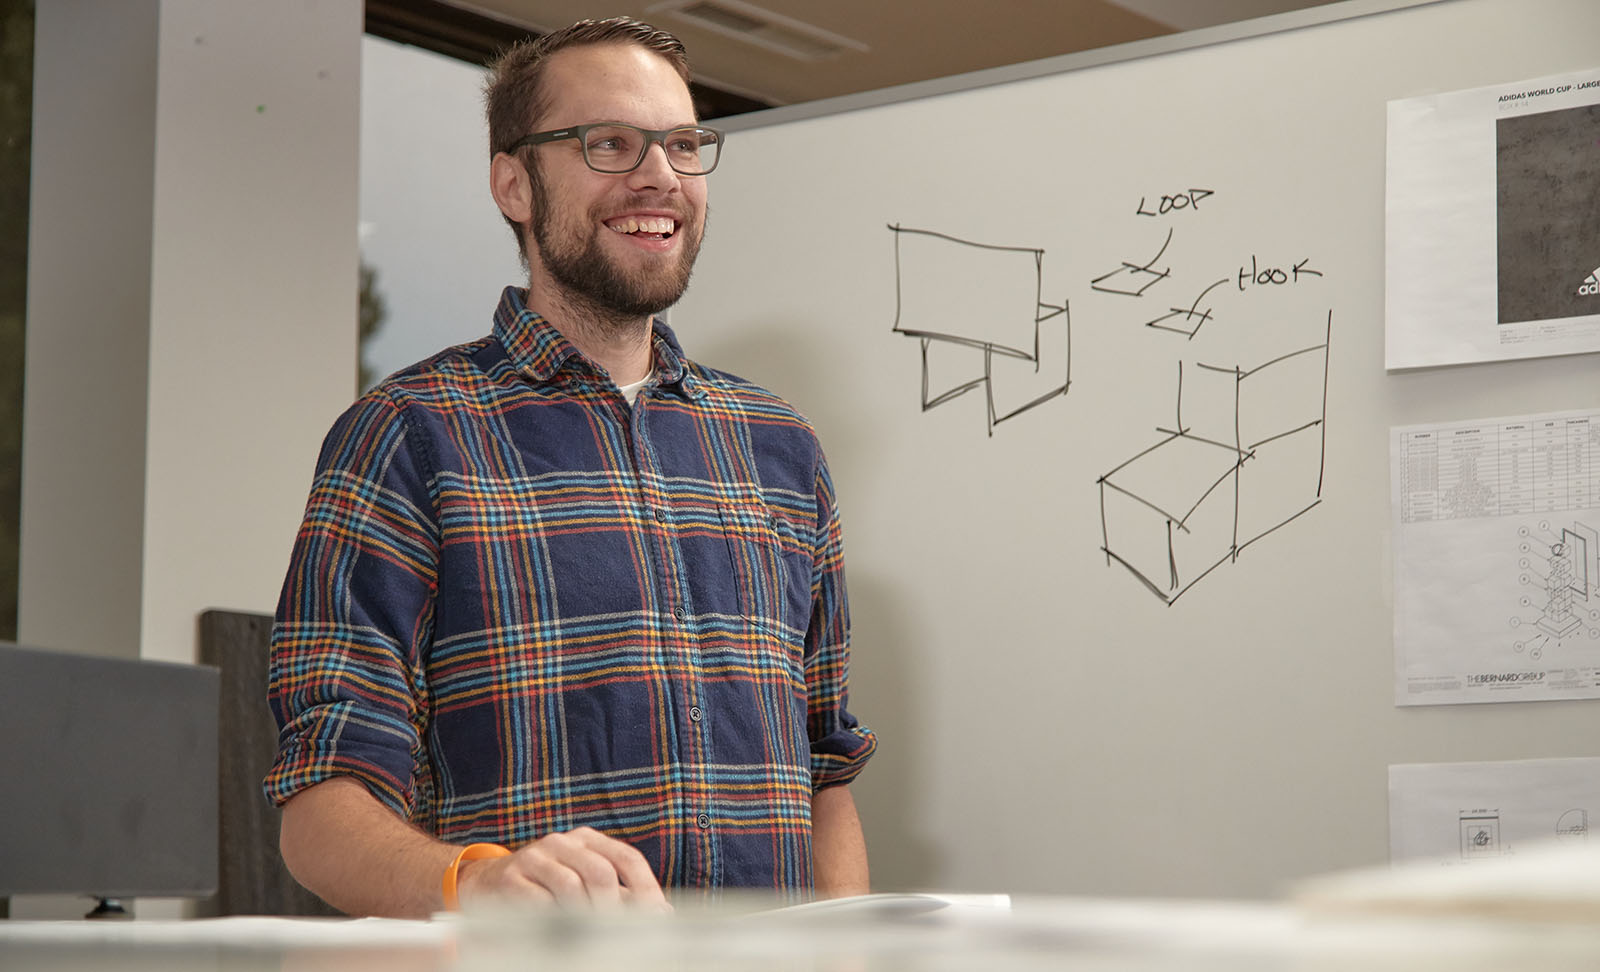 Designer from The Bernard Group sketches concepts on whiteboard